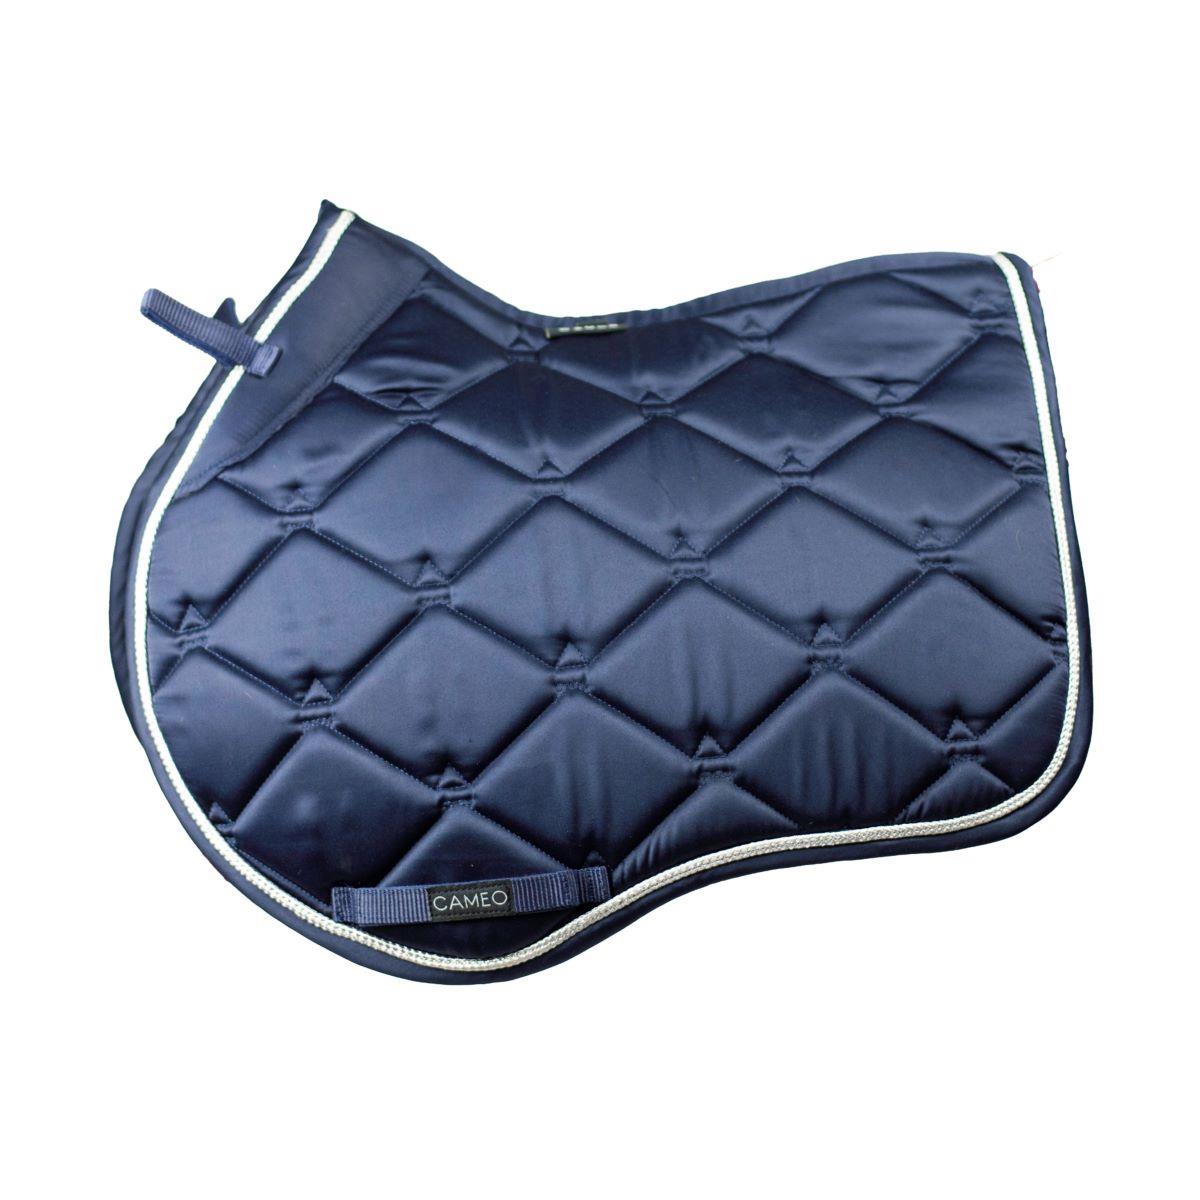 Cameo Equine Core GP Jump Saddlecloth: Shock Absorbing, Breathable Satin Outer - Just Horse Riders